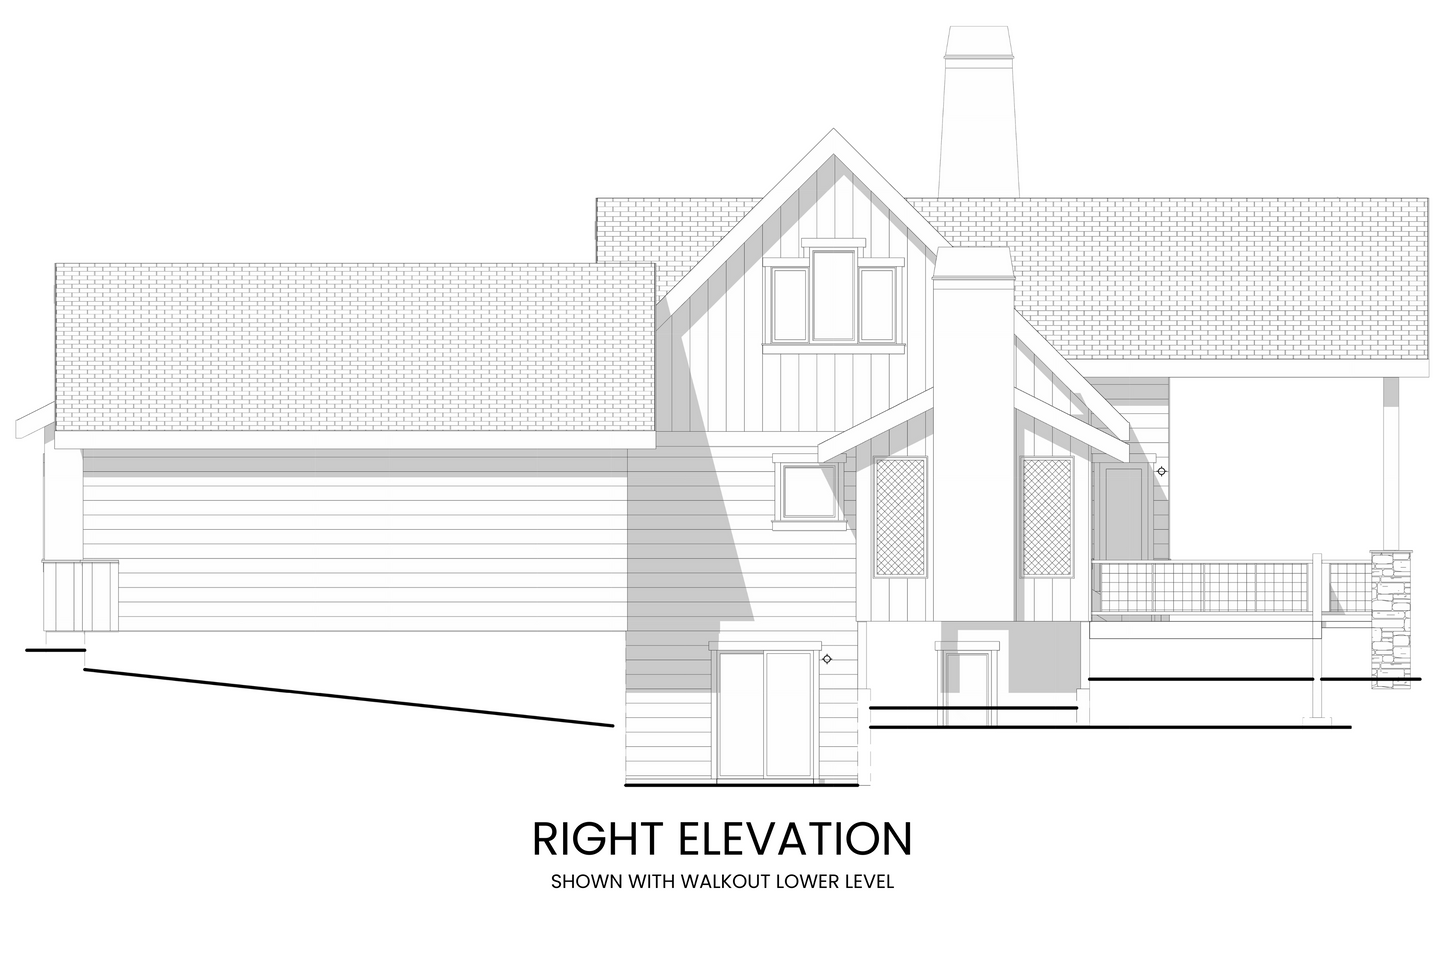 Cabin-Plan-with-Front-Porch-for-Sites-with-a-Rear-View-Right-Elevation-Rocky-Mountain-Plan-Company-Lake-Agnes